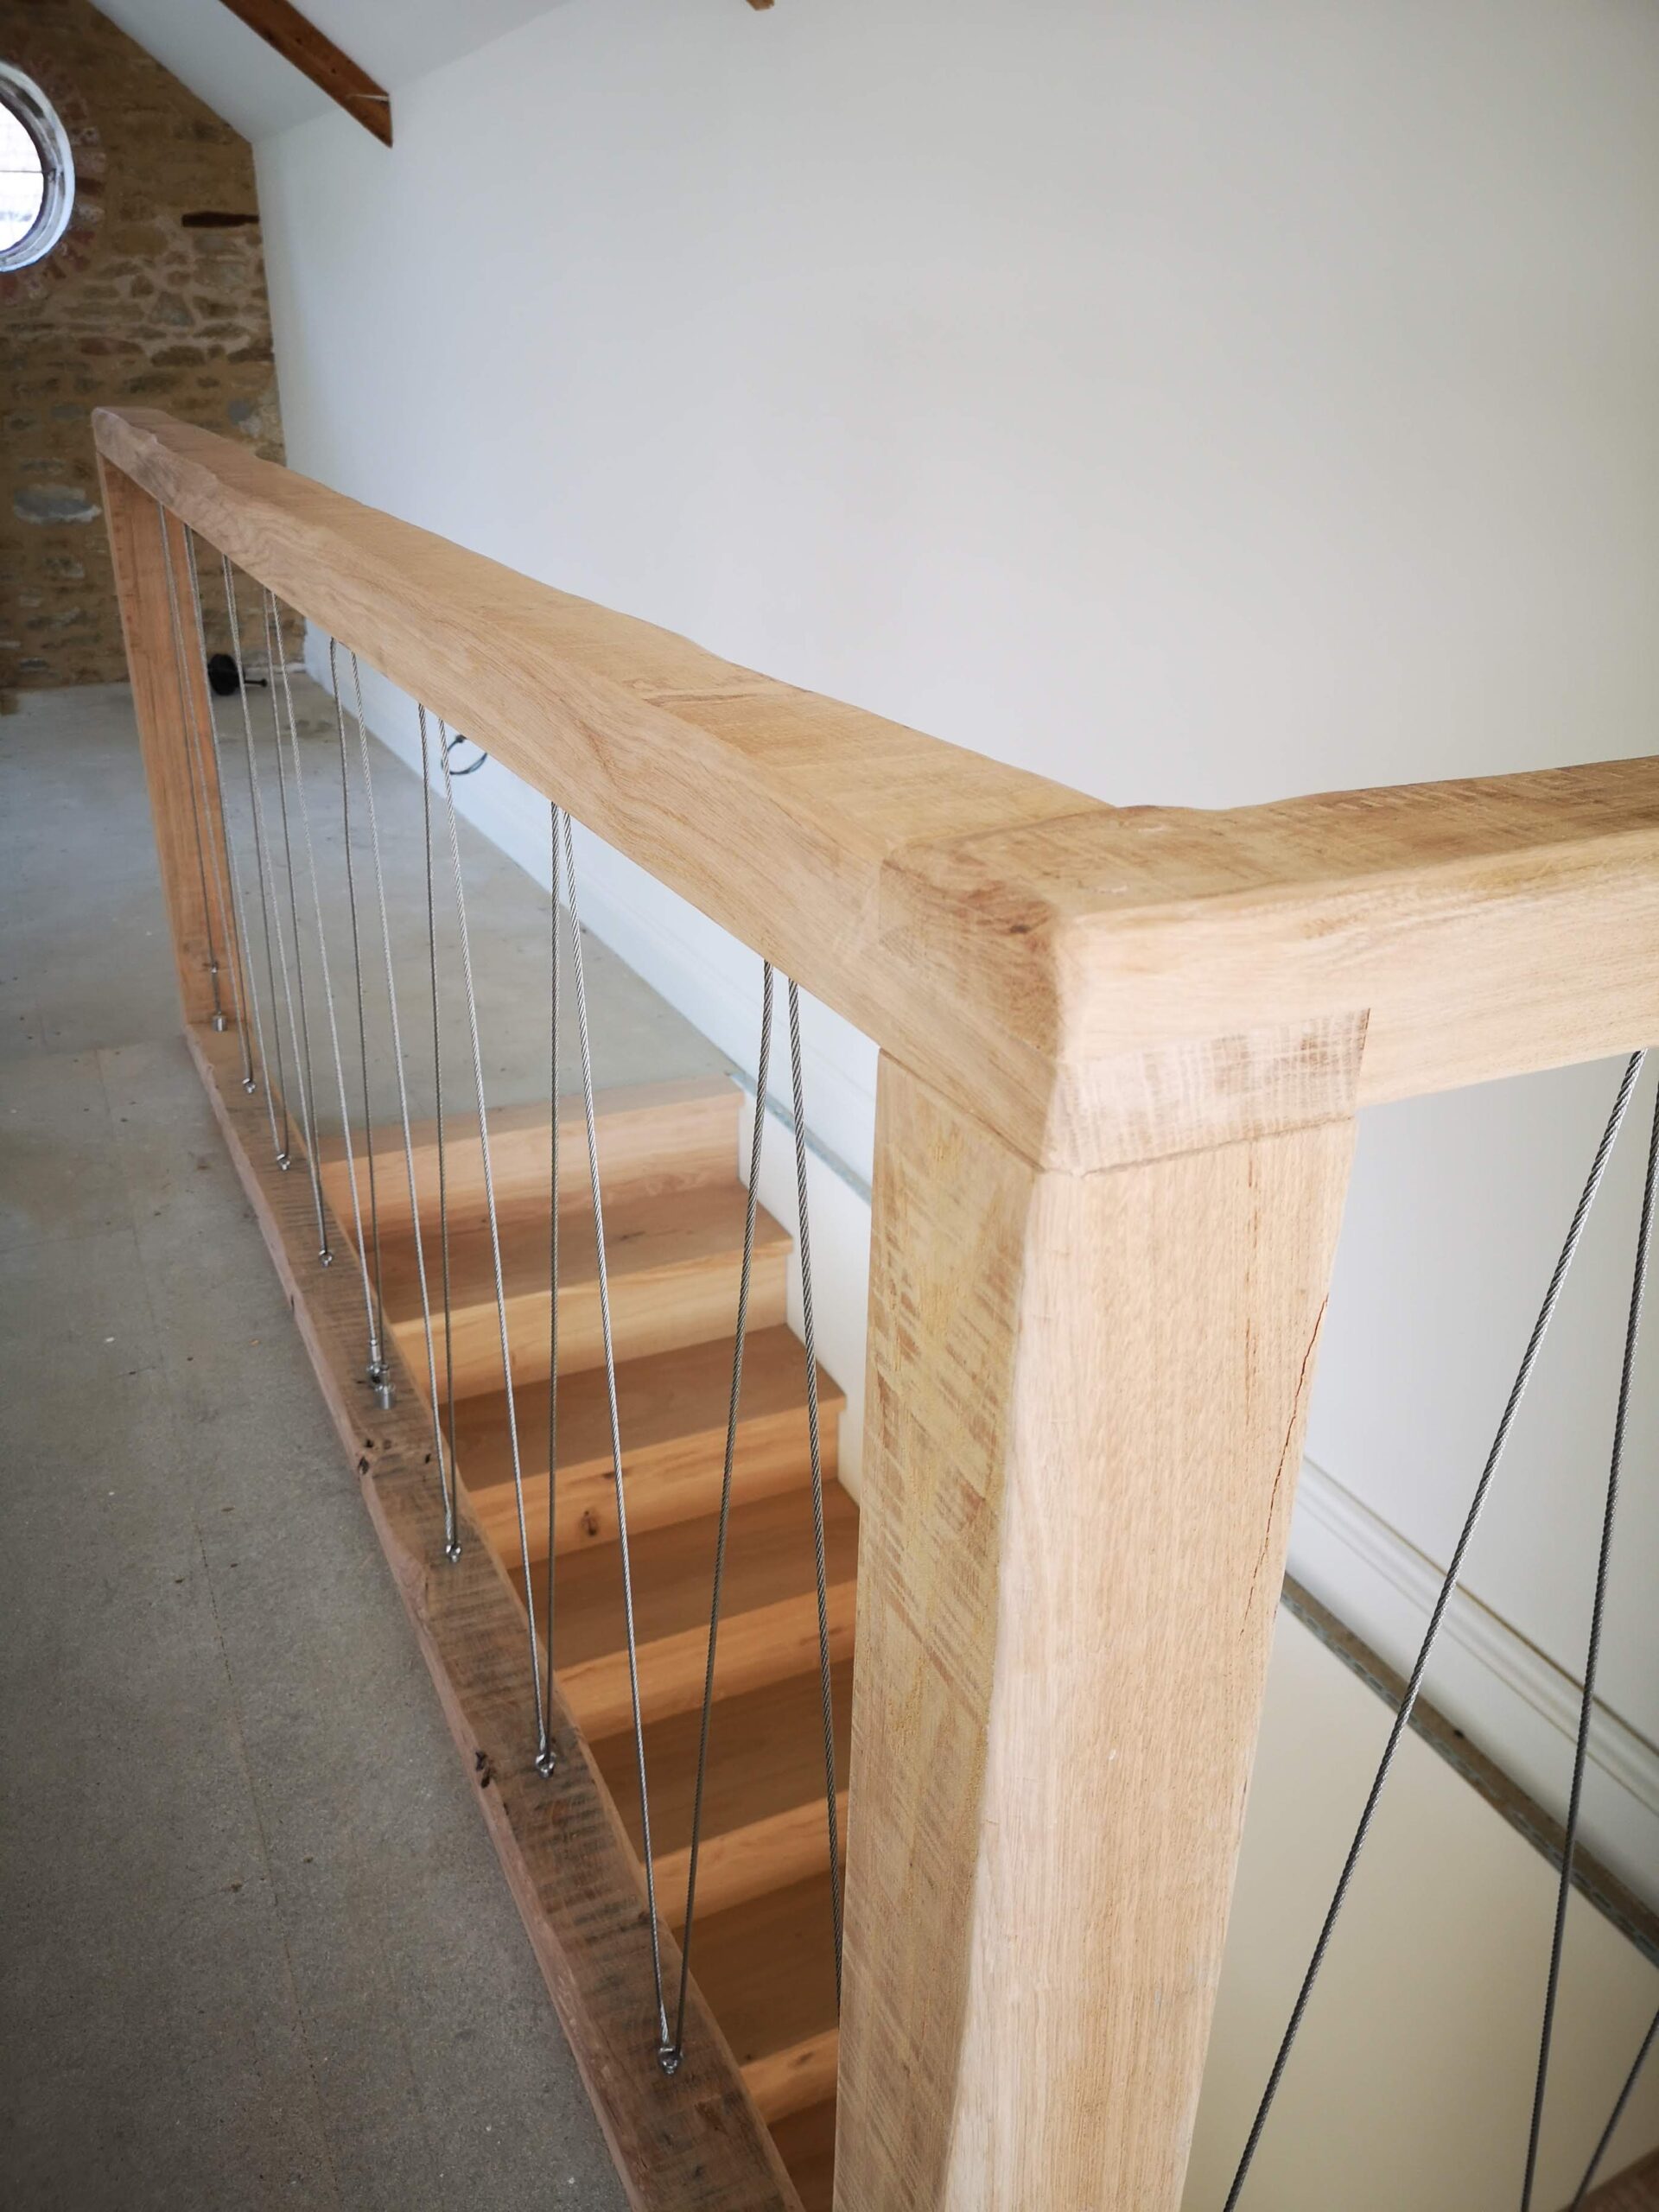 Bespoke timber stairs by Kings Stag Joinery